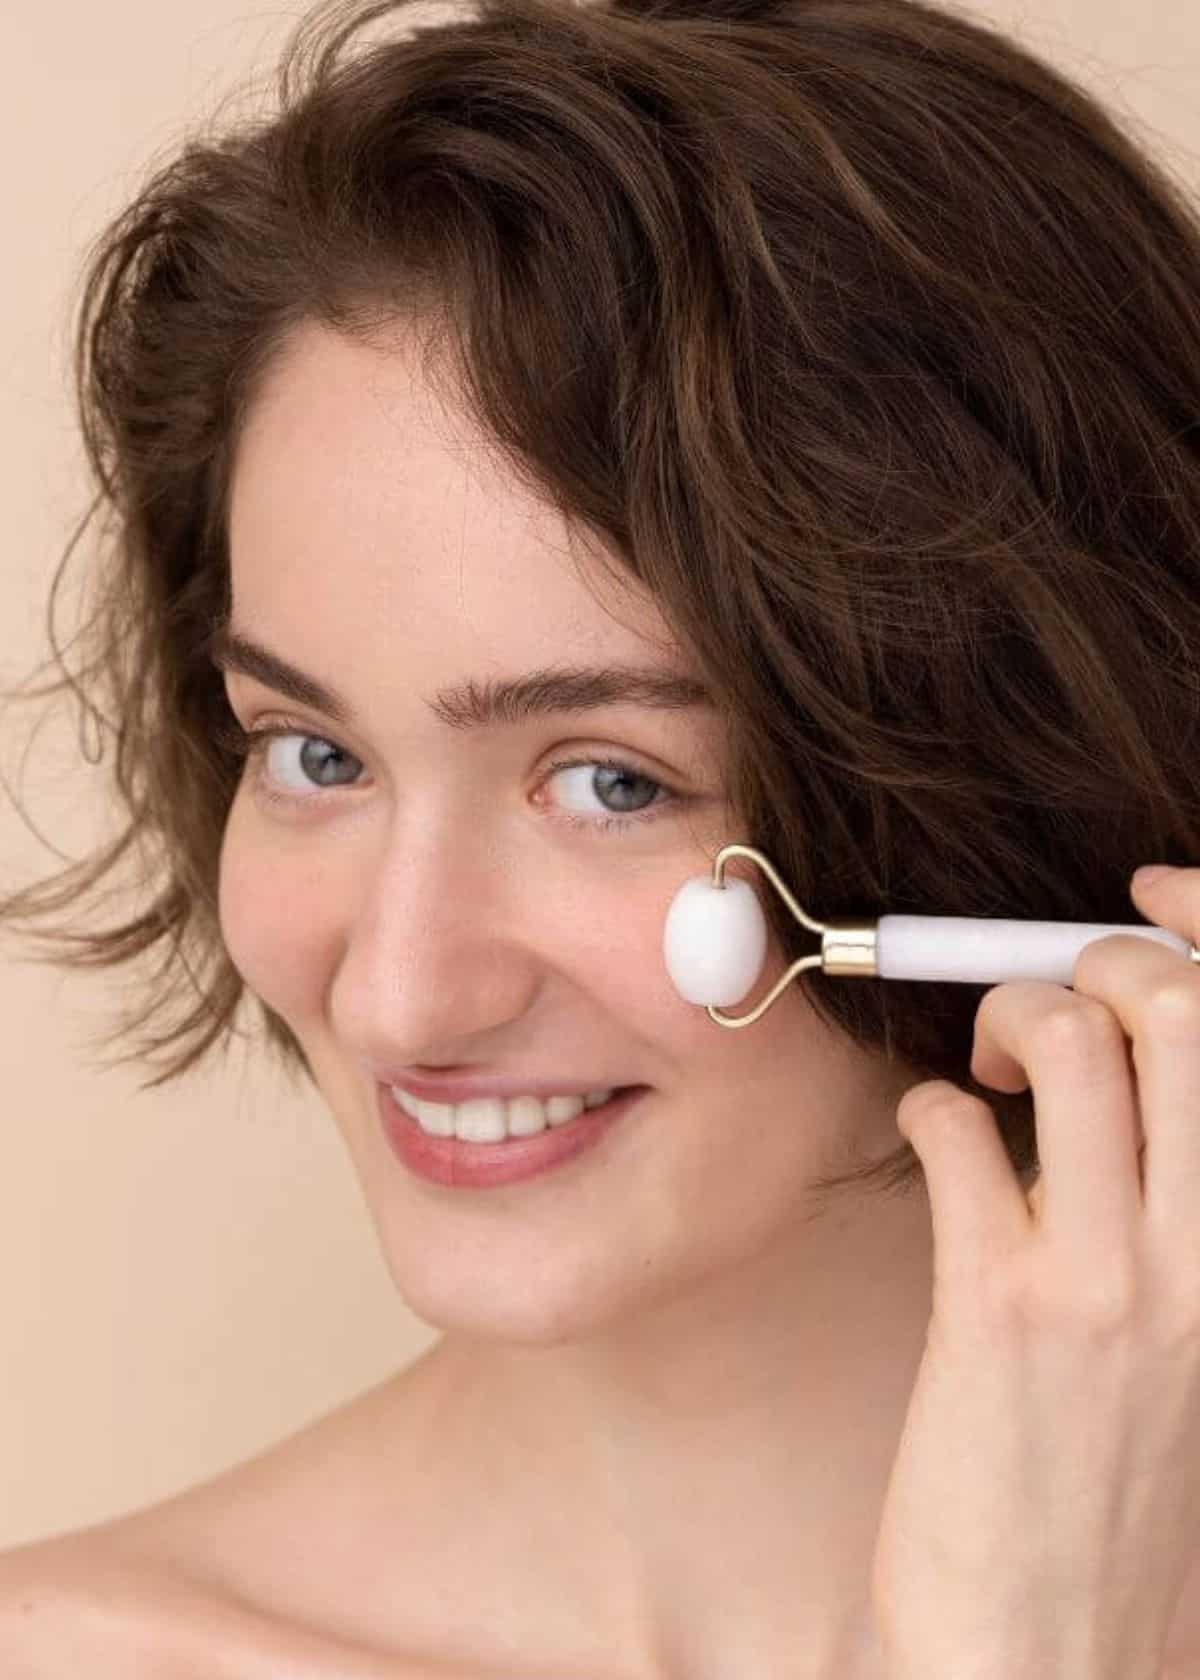 What are The rules for Face Roller?